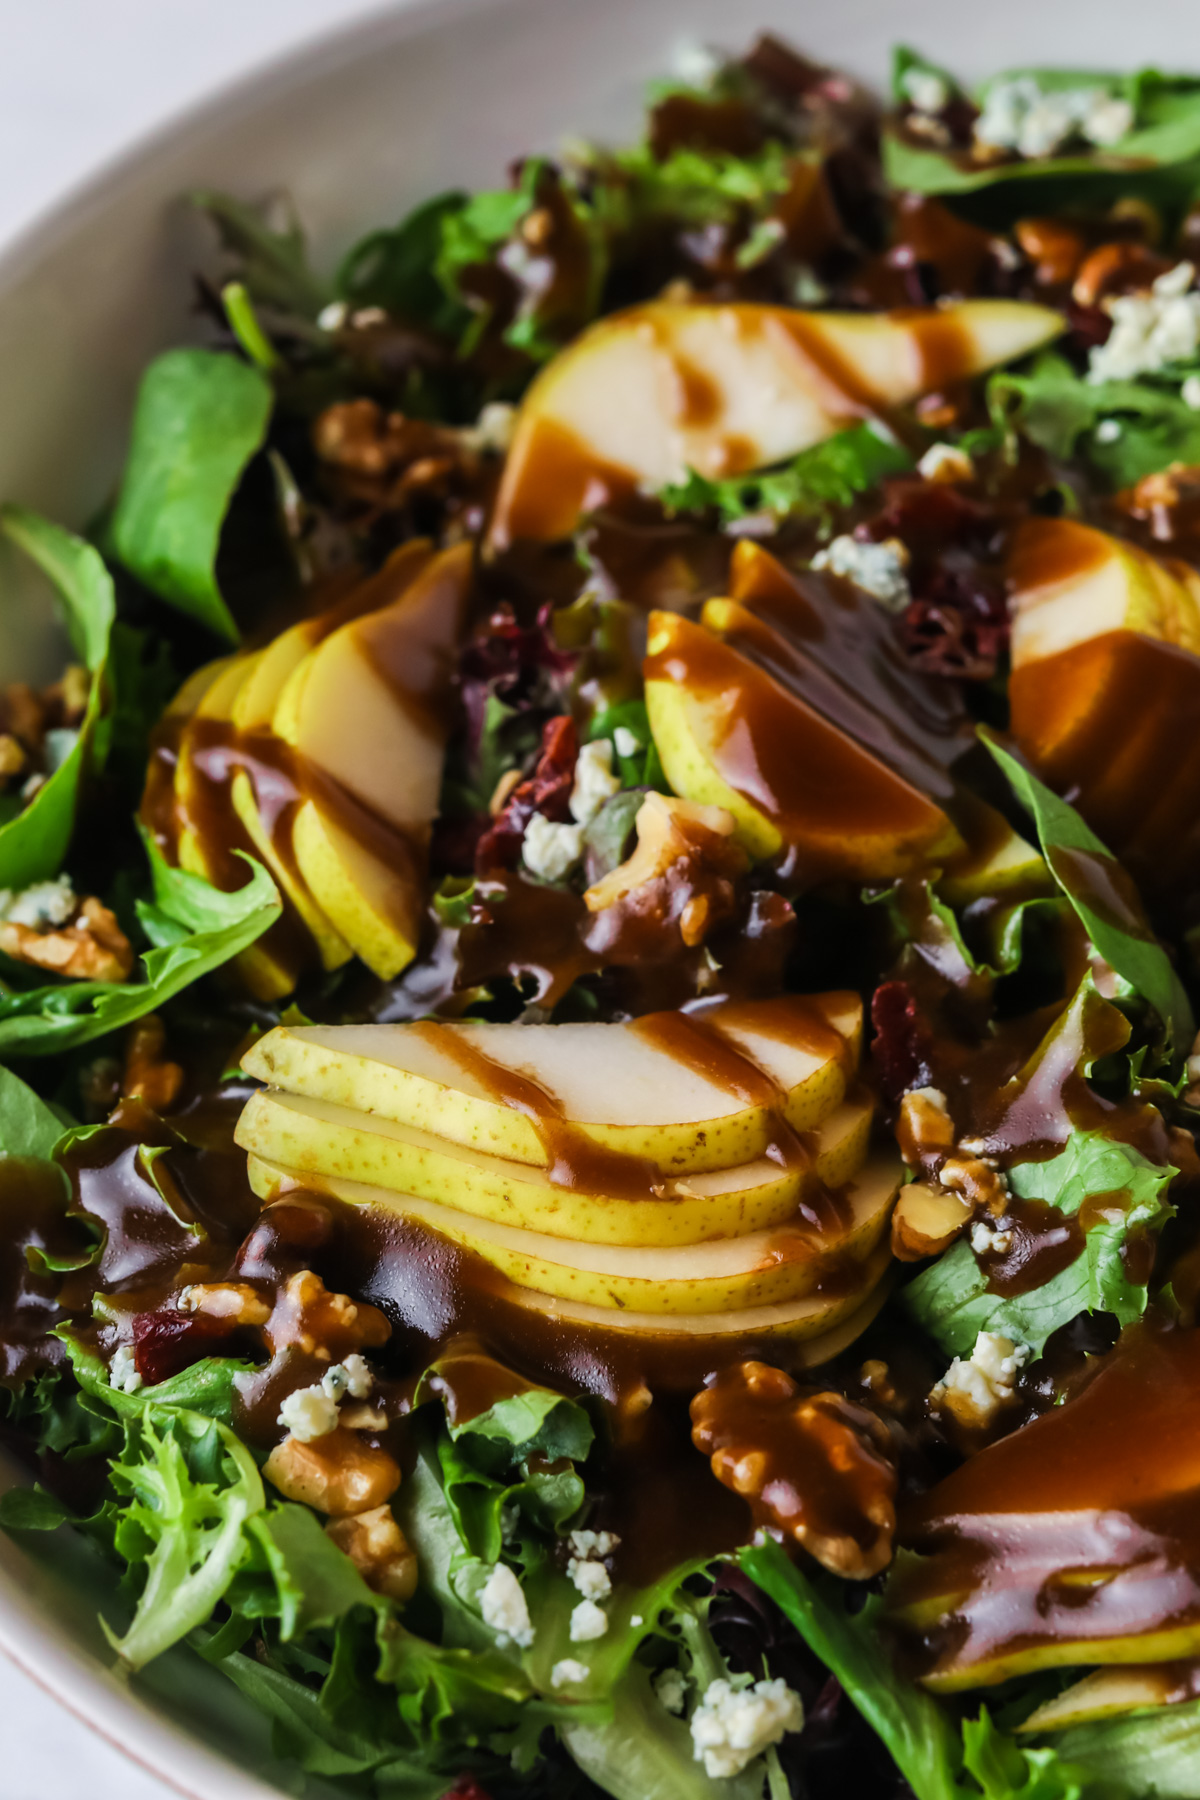 Pear salad with balsamic dressing.